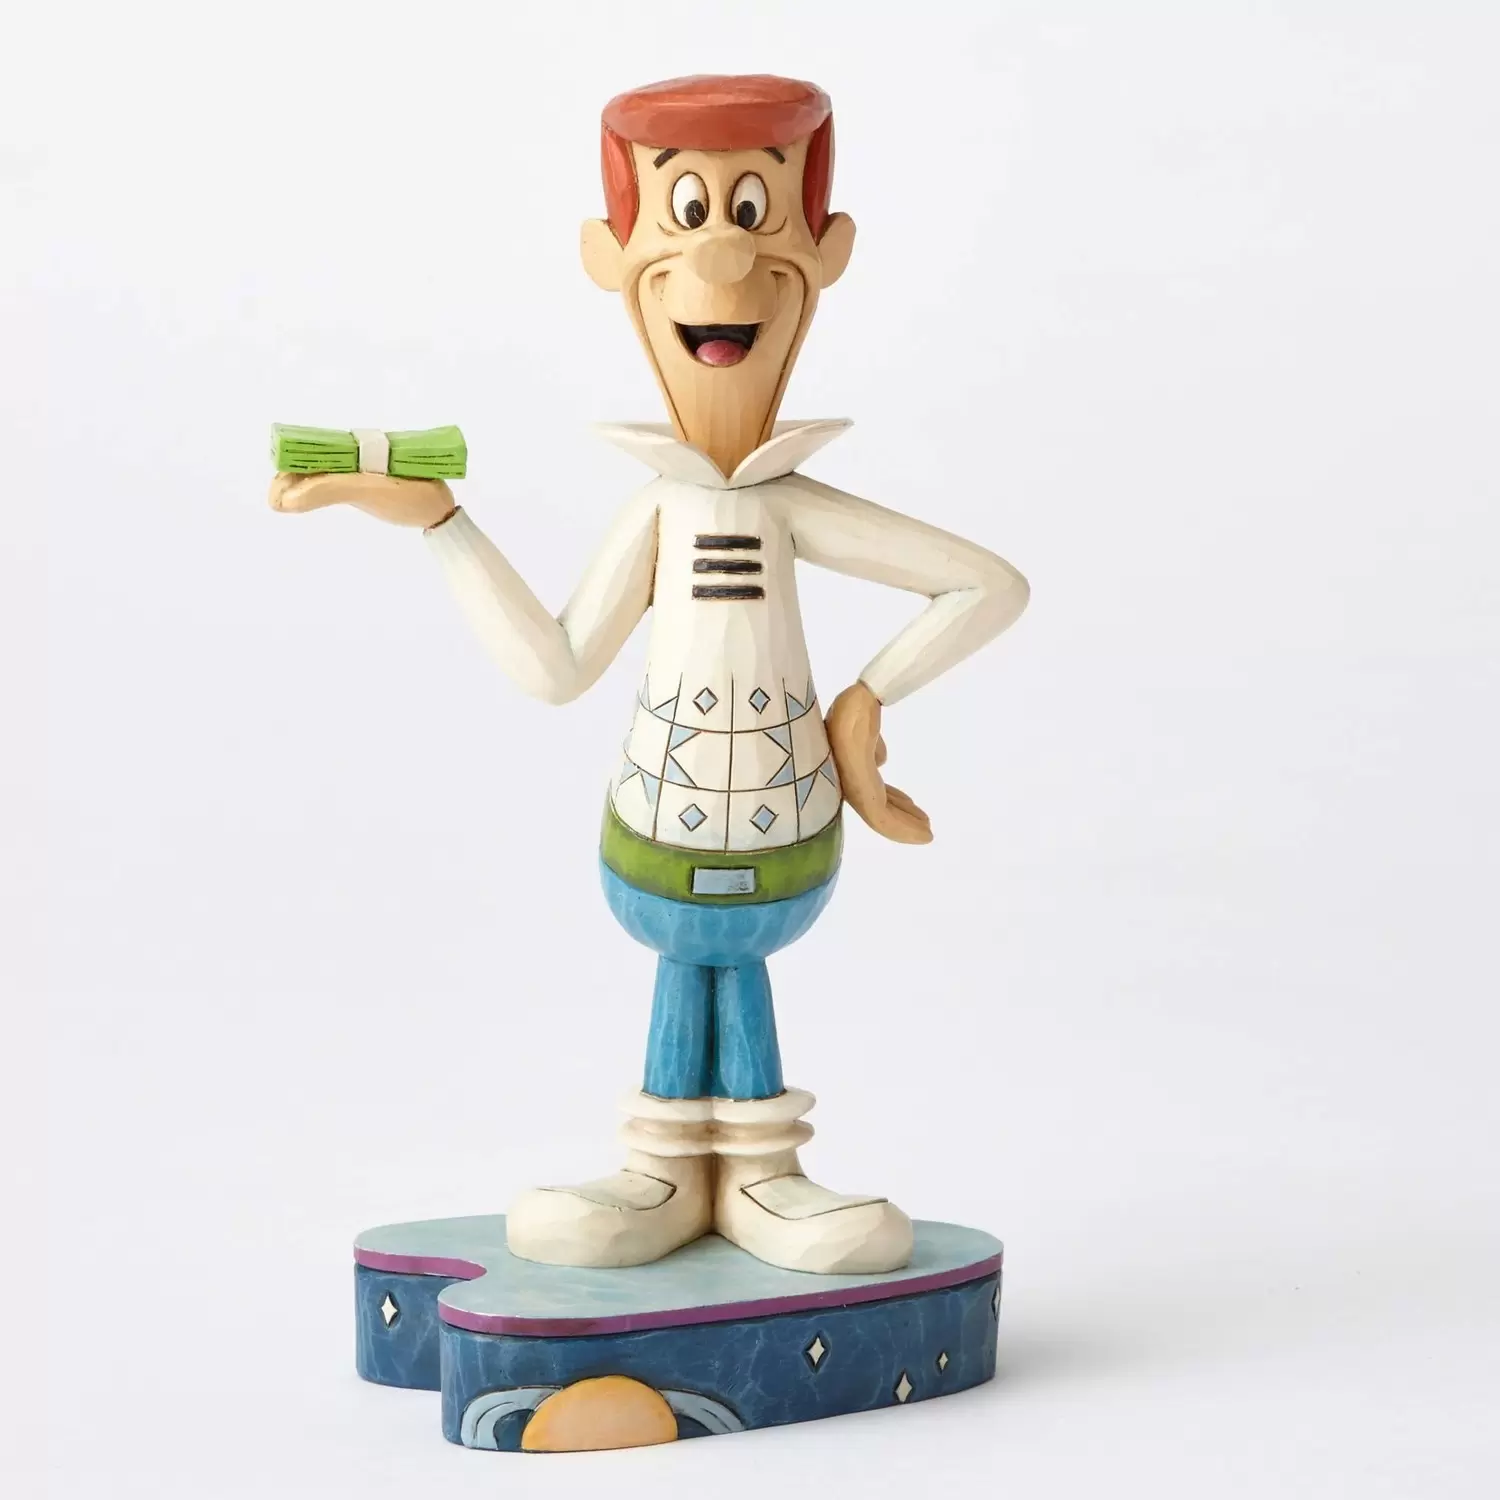 Cartoons Characters by Jim Shore - Meet George Jetson - George Jetson